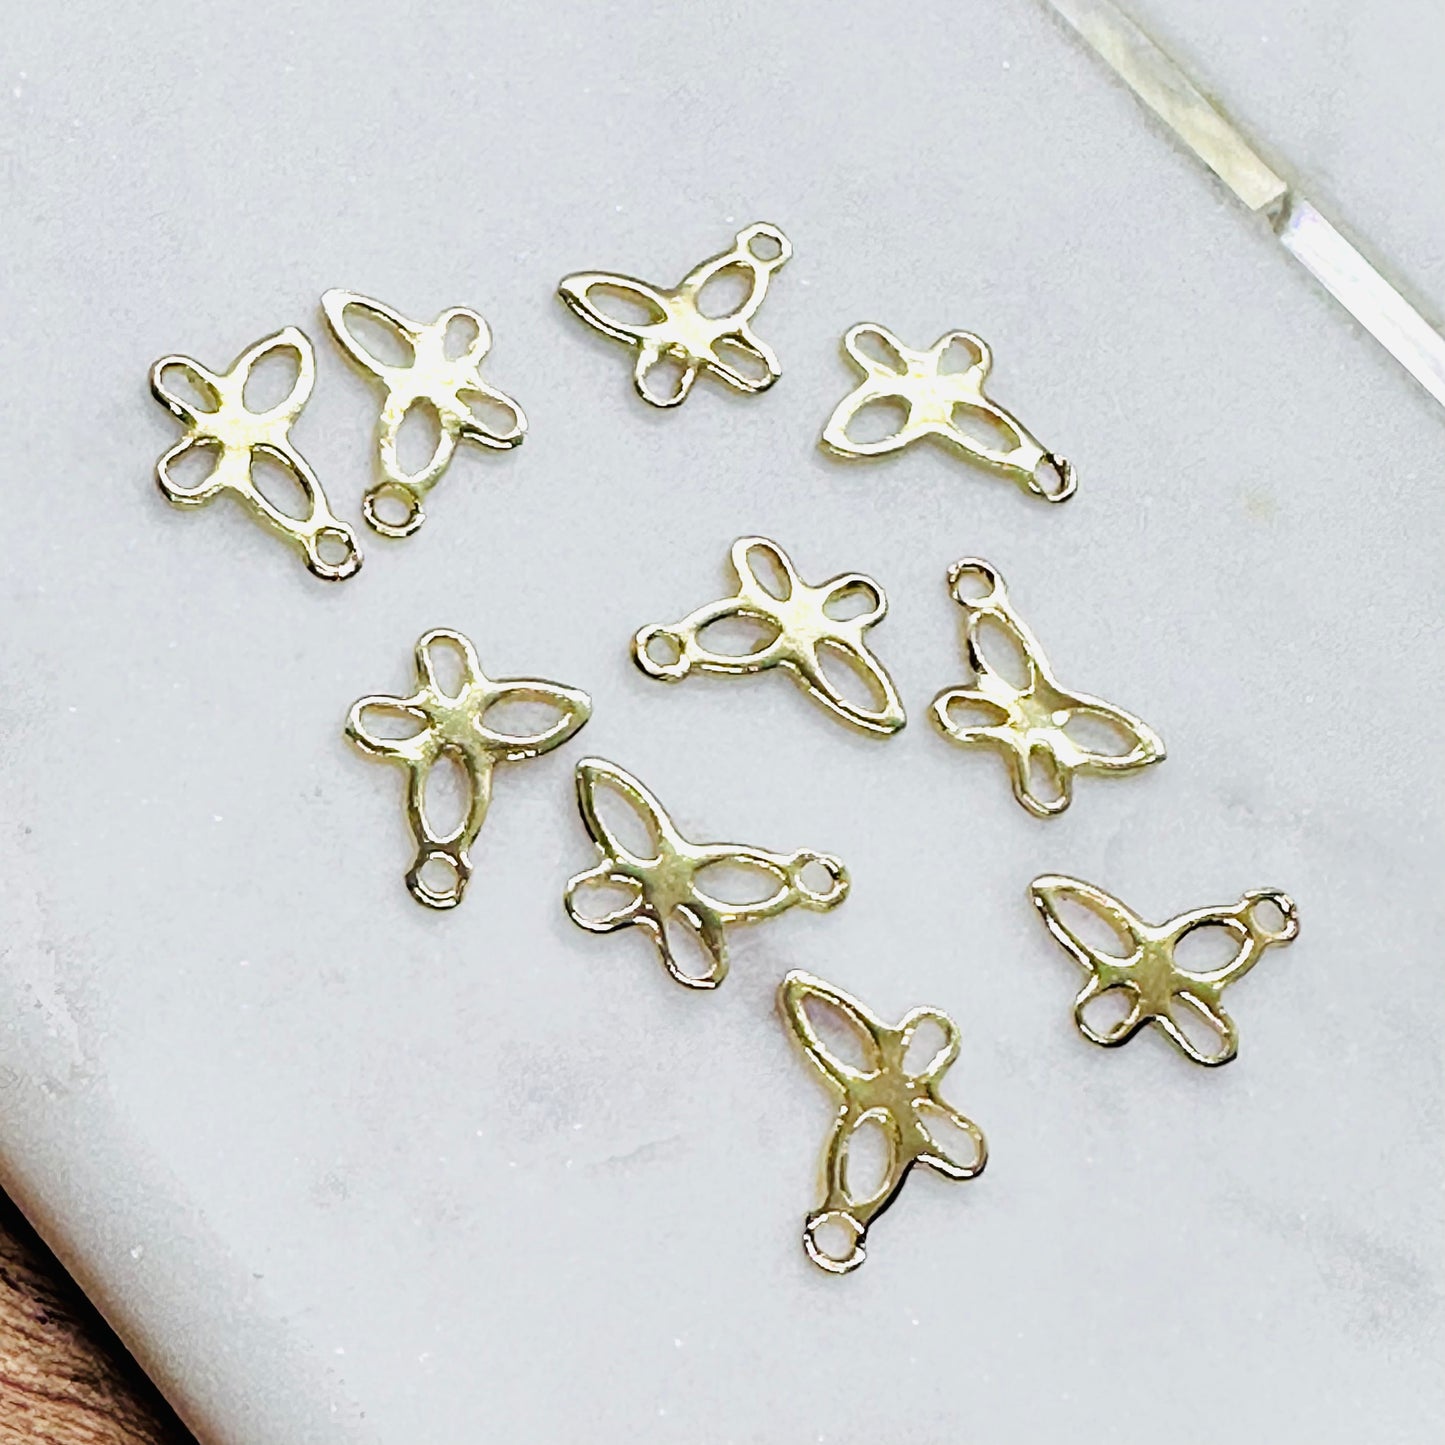 Charms Butterfly (10pcs)